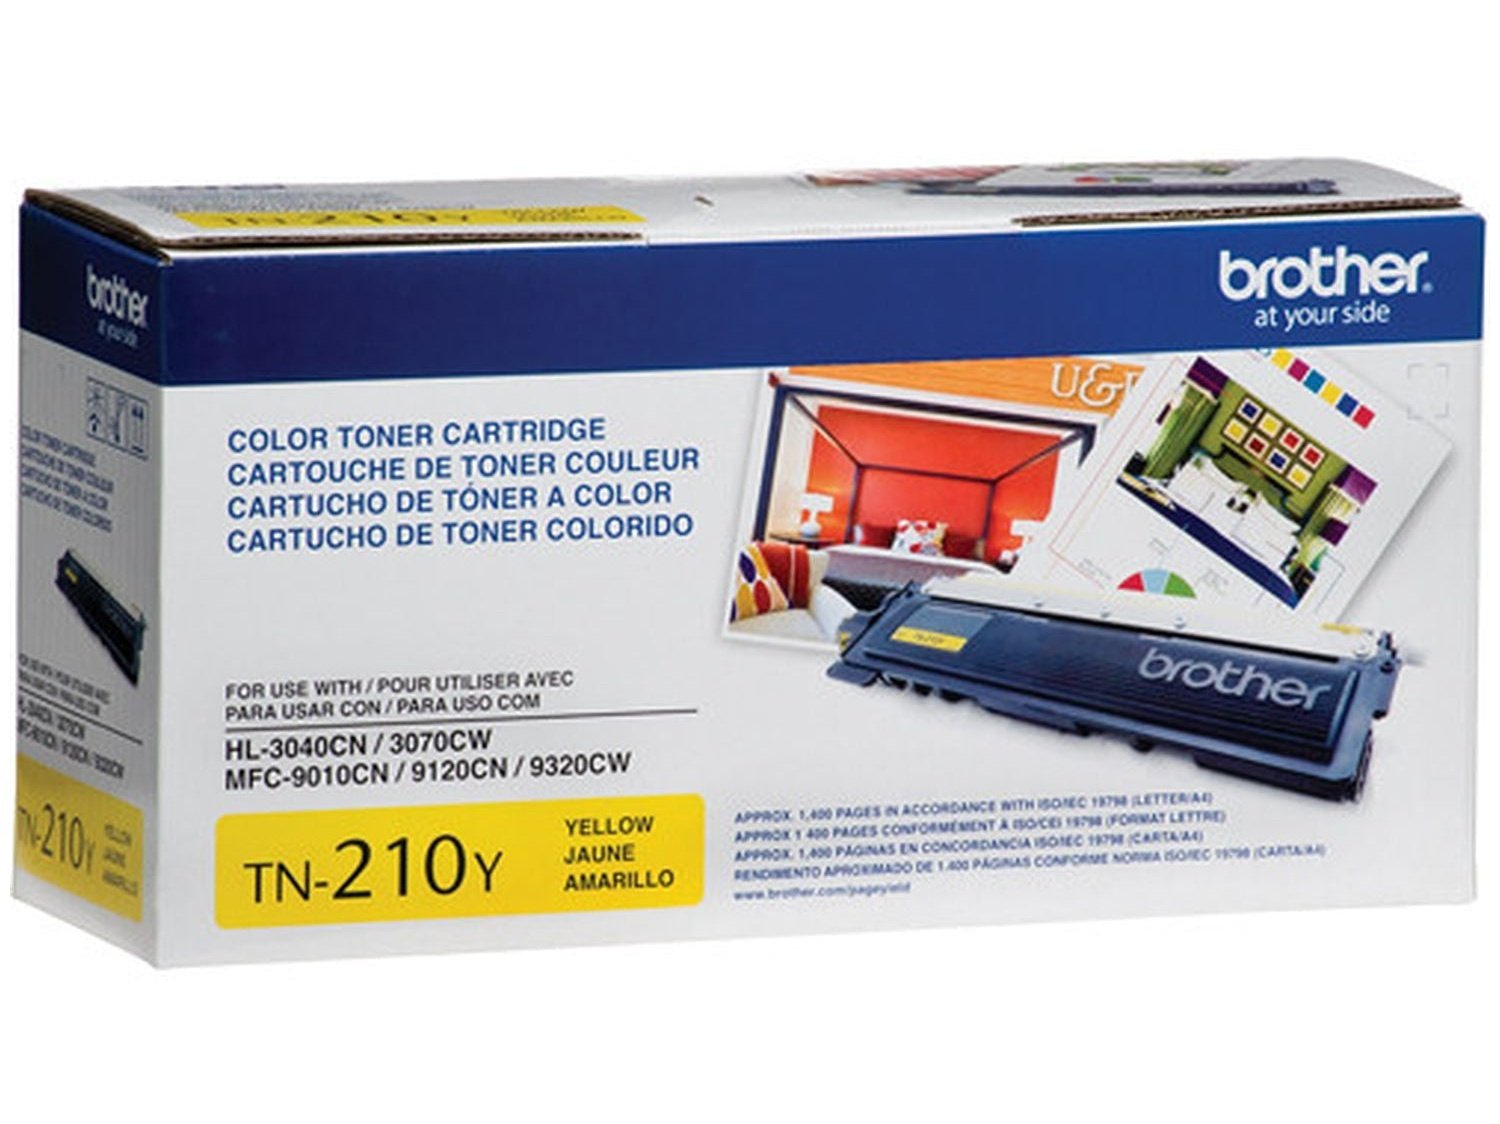 ICU Compatible/ OEM Get Brother ICU-TN-210-Y Yields 1400 Pages TN-210 Yellow Standard Yield 1400 Pages Toner Cartridge (TN210Y) - Ink Cartridges USA